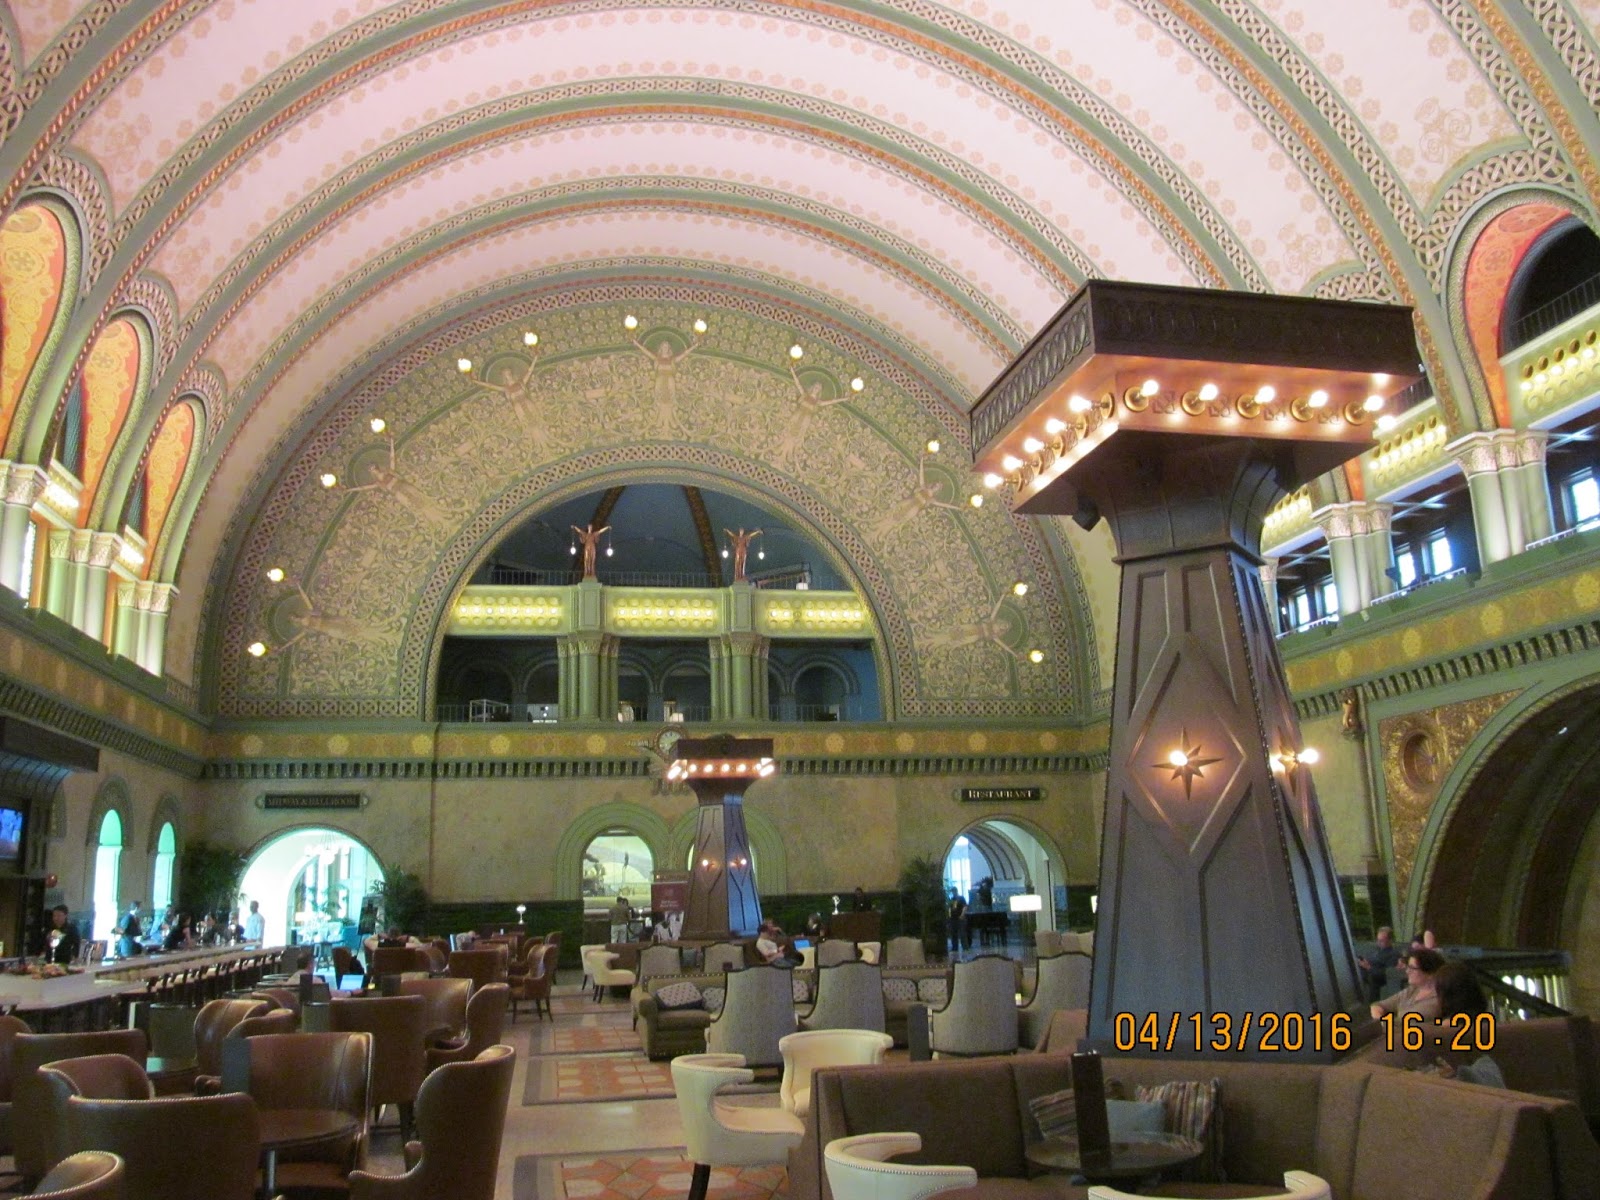 Trip to the Mall: St. Louis Union Station- Downtown STL